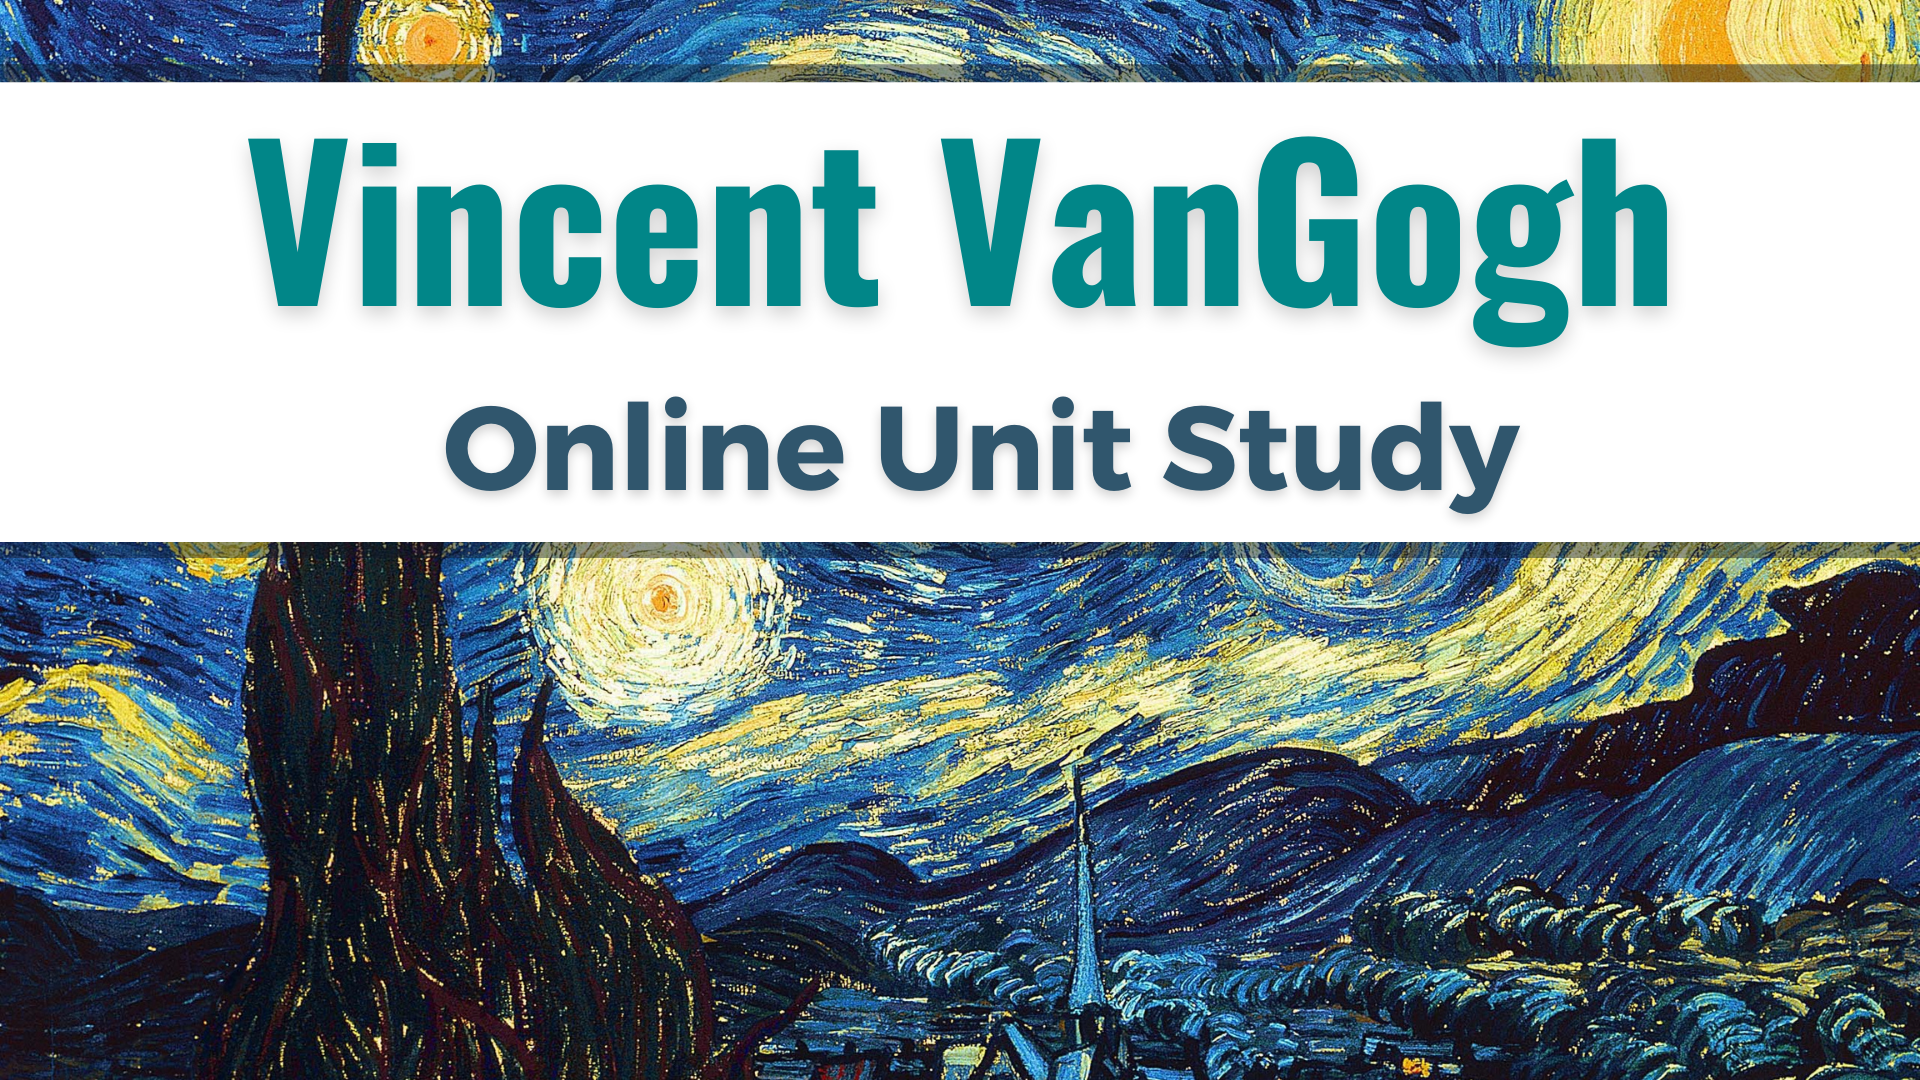 Learn about Vincent Van Gogh with Online Unit Studies. Enroll in this online homeschool curriculum for lesson plans and activities.